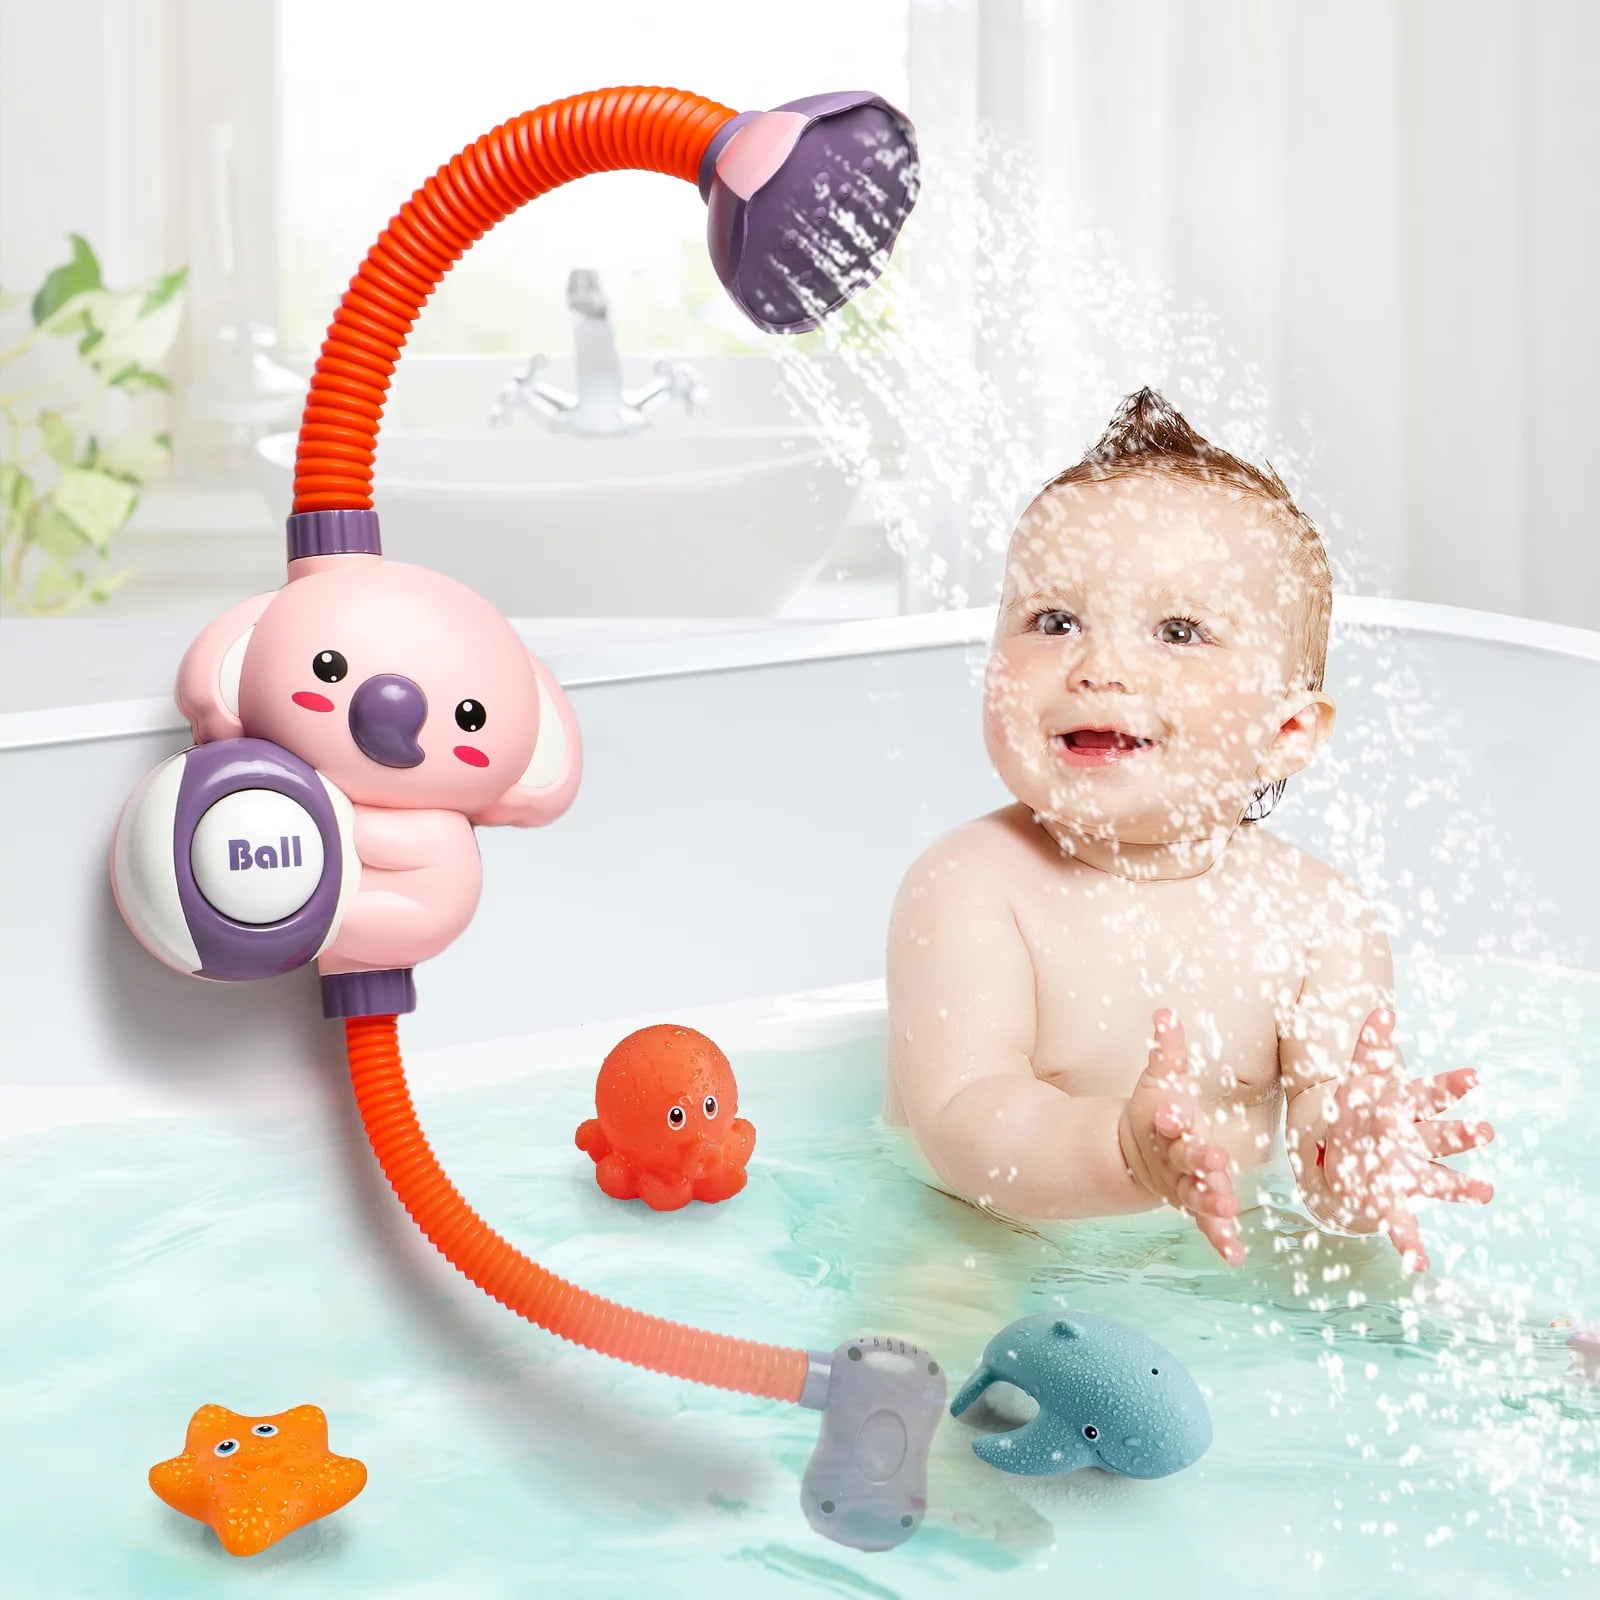 Koala Bath Shower Toy For Kids Battery Operated Water Squirt